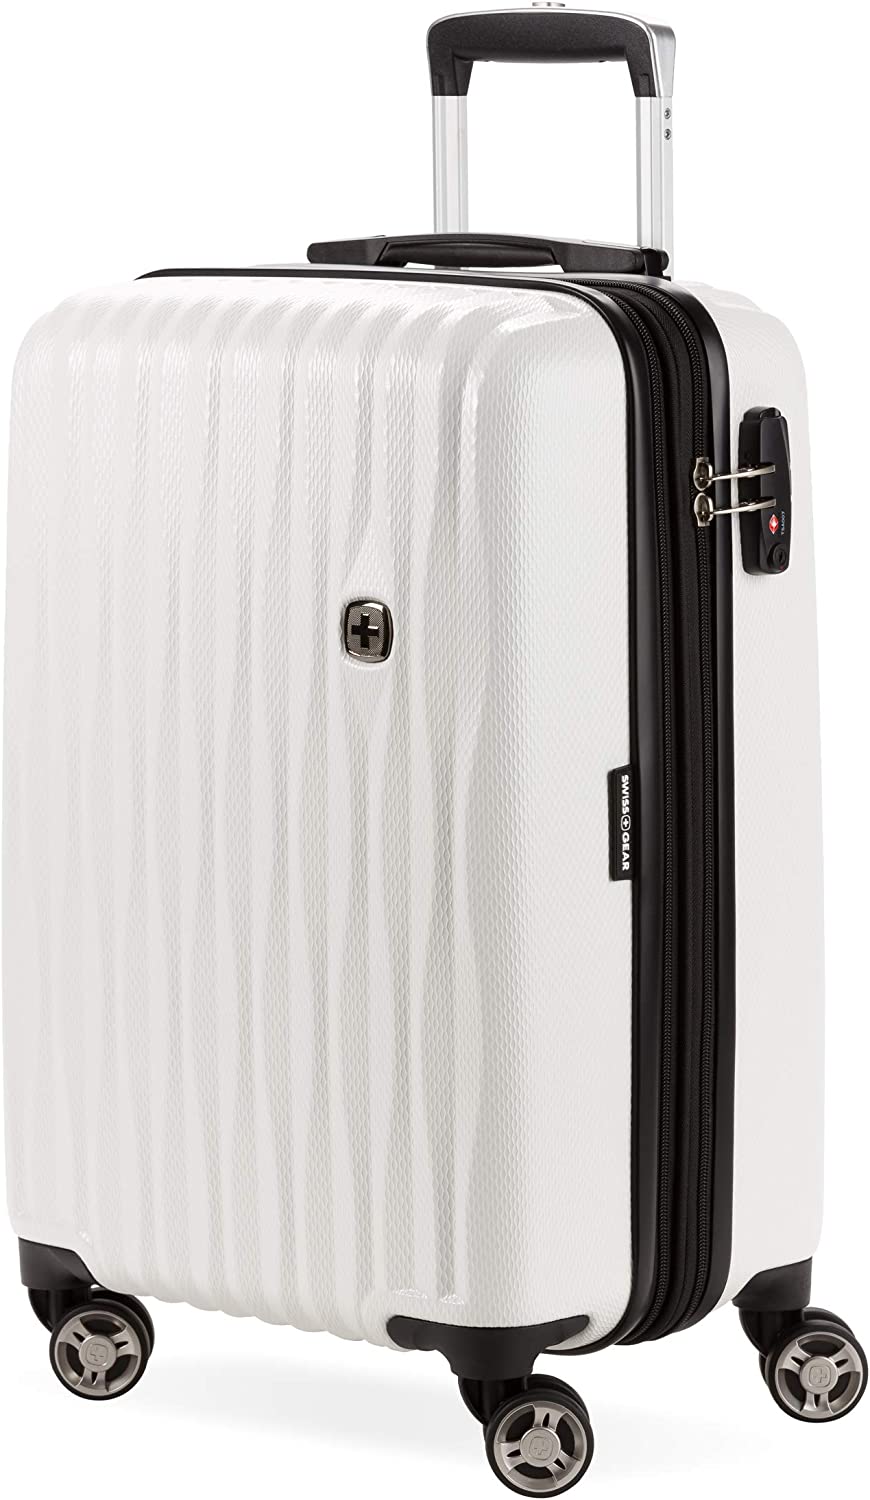 19" SwissGear Energie Hardside Luggage Carry-On Luggage With Spinner Wheels & TSA Lock (White) $82.29 + Free Shipping